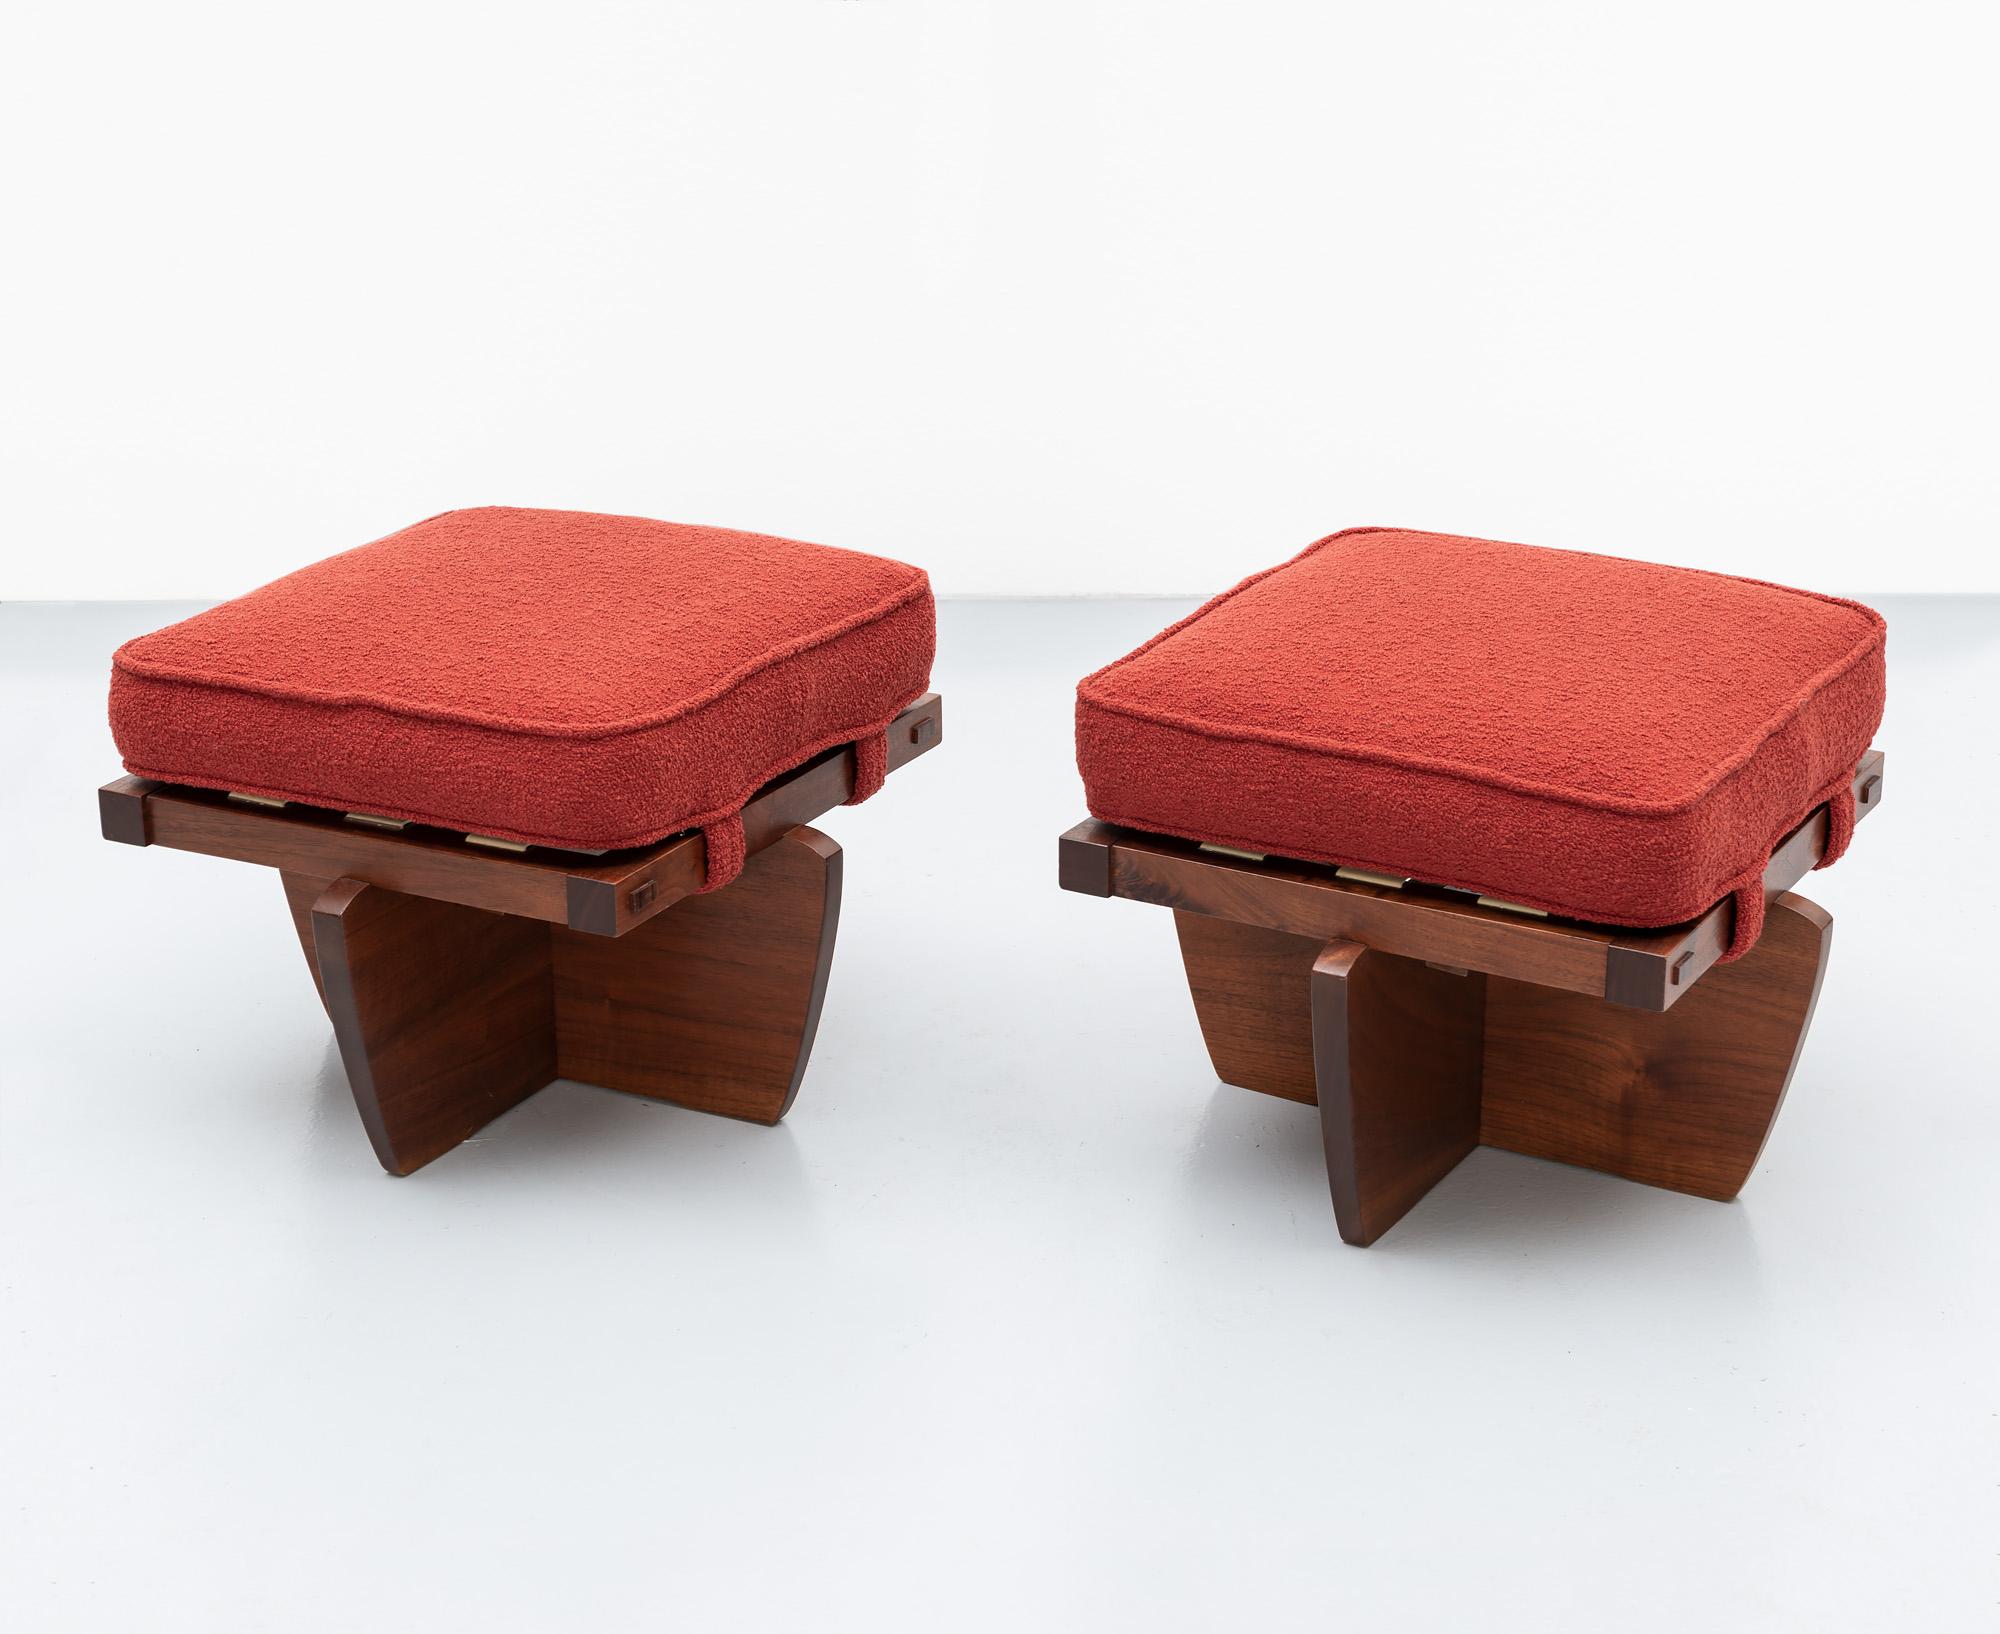 A rare pair of walnut Greenrock stools by George Nakashima in walnut with rosewood mortise and tenon joints. New cushions in place textiles wool bouclé in a gorgeous brick red. New Hope, PA, 1980s.